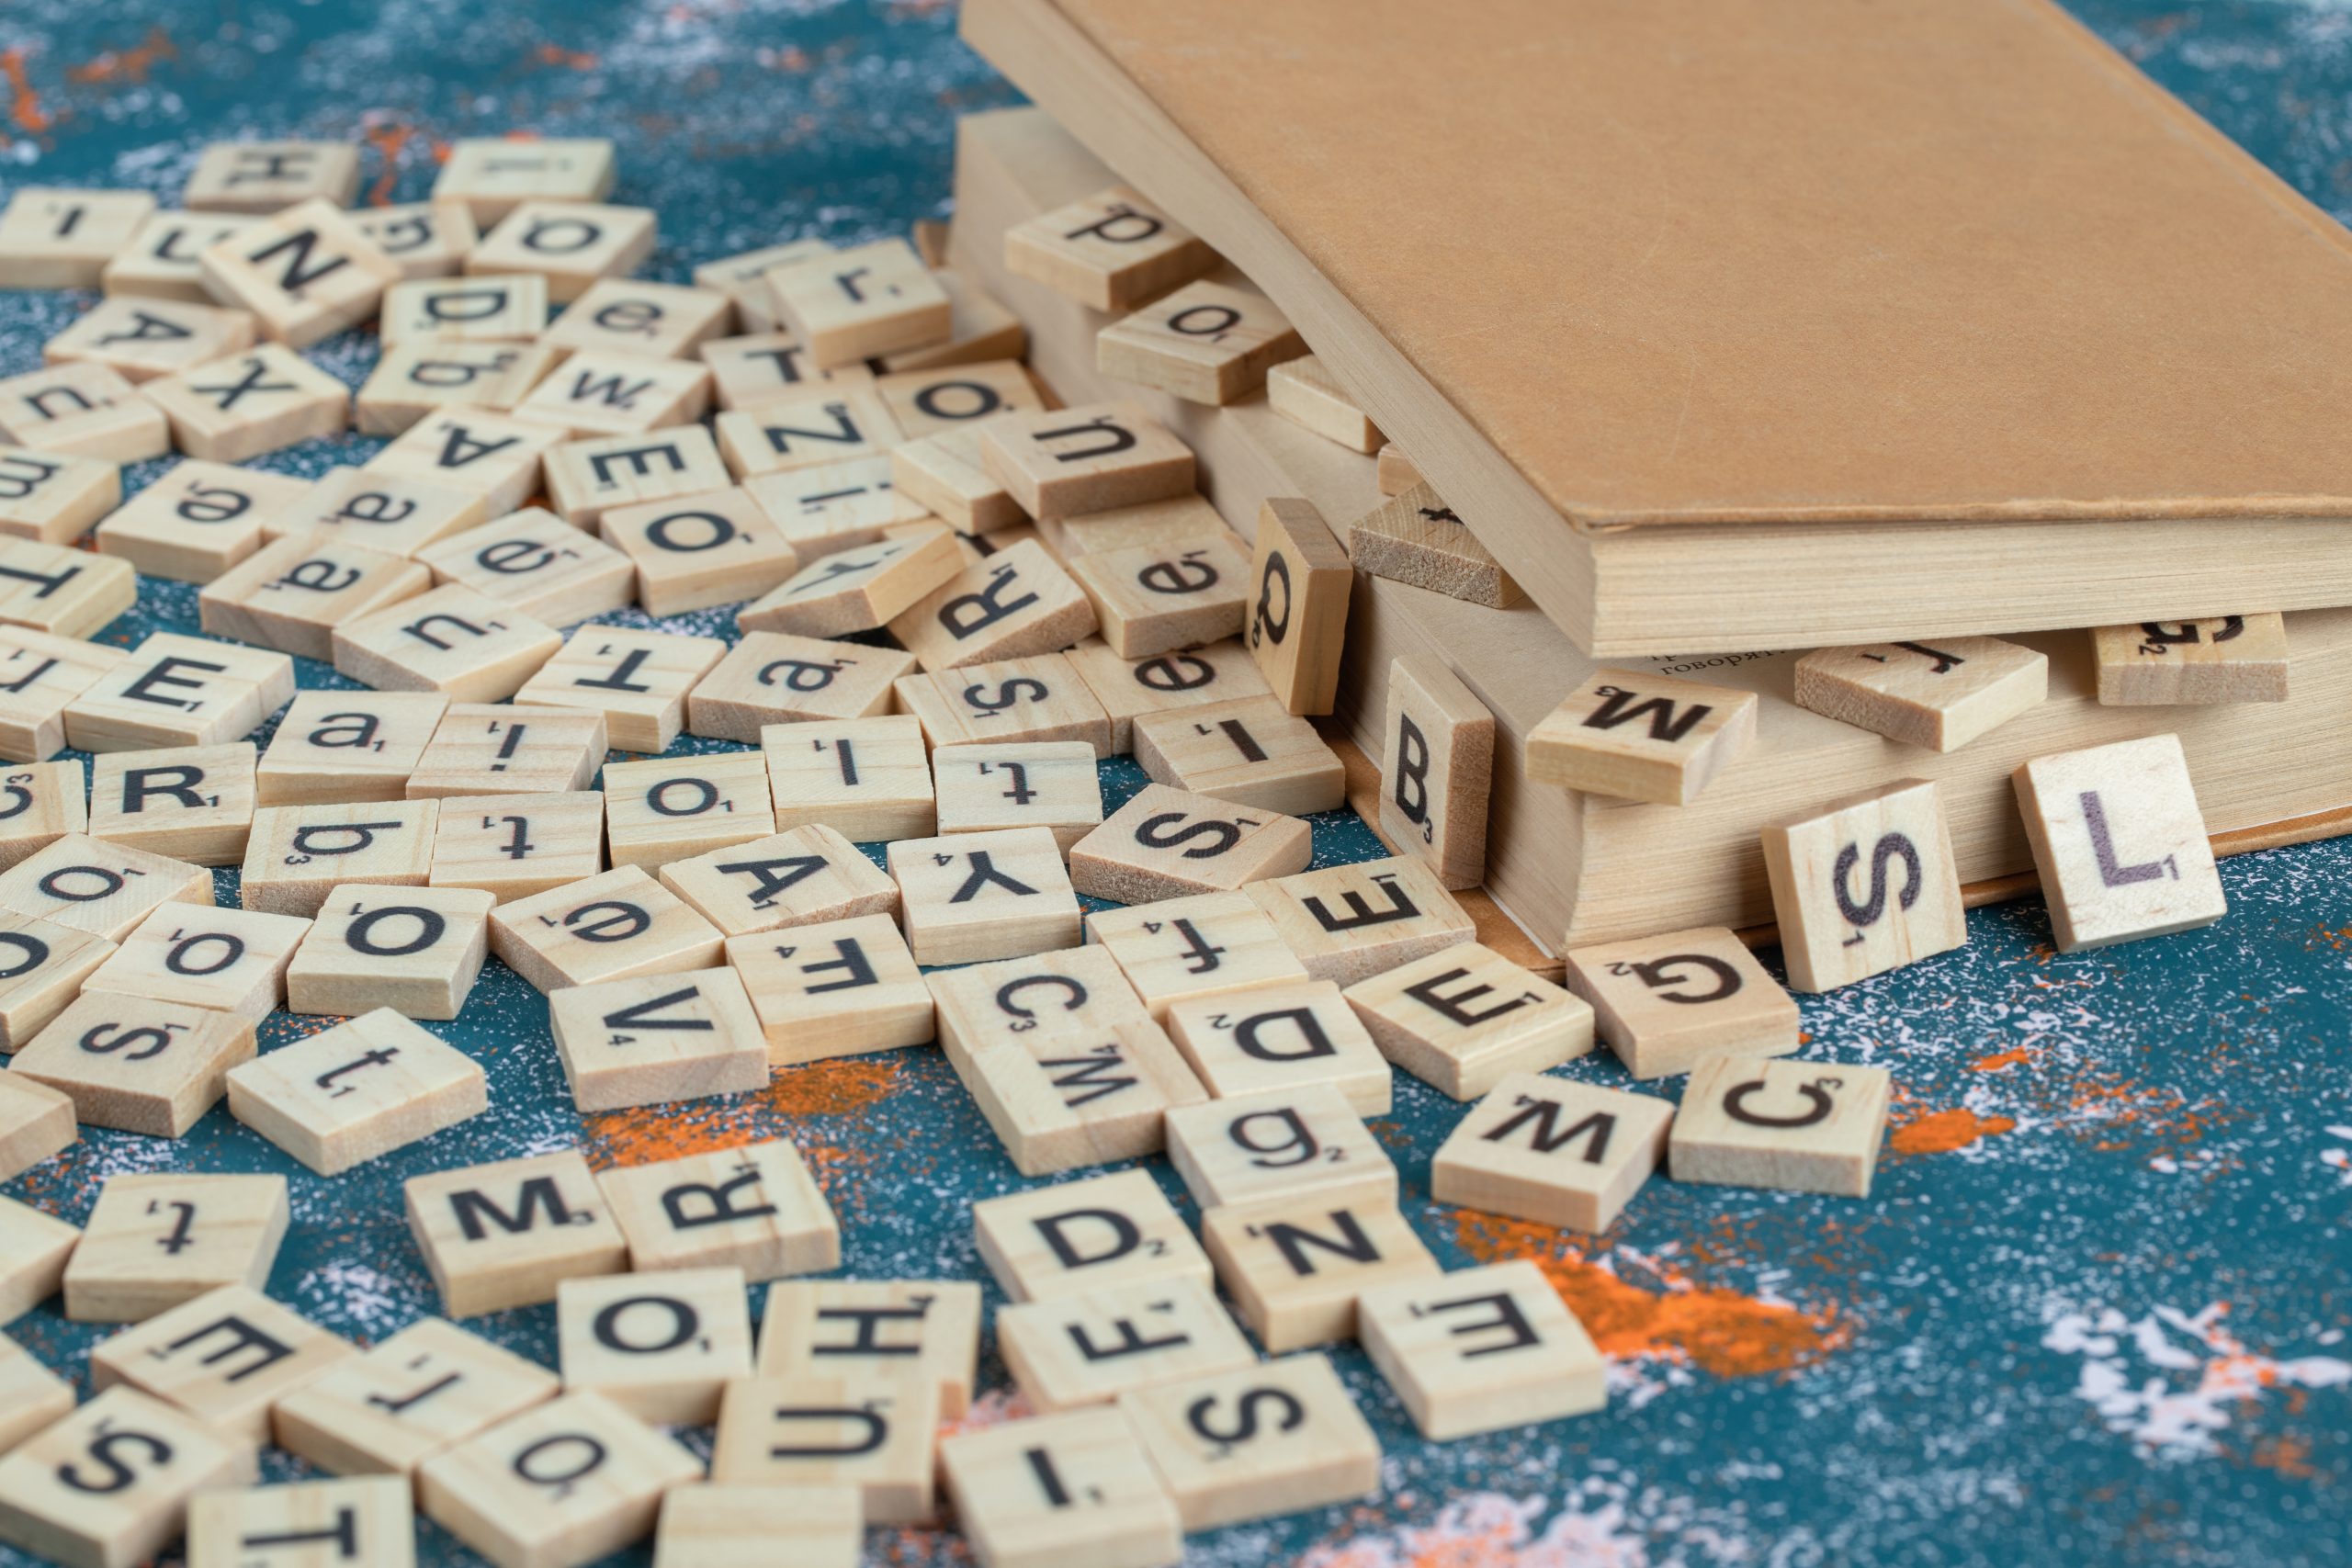 wooden-dice-with-letters-on-them-between-the-pages-of-a-book